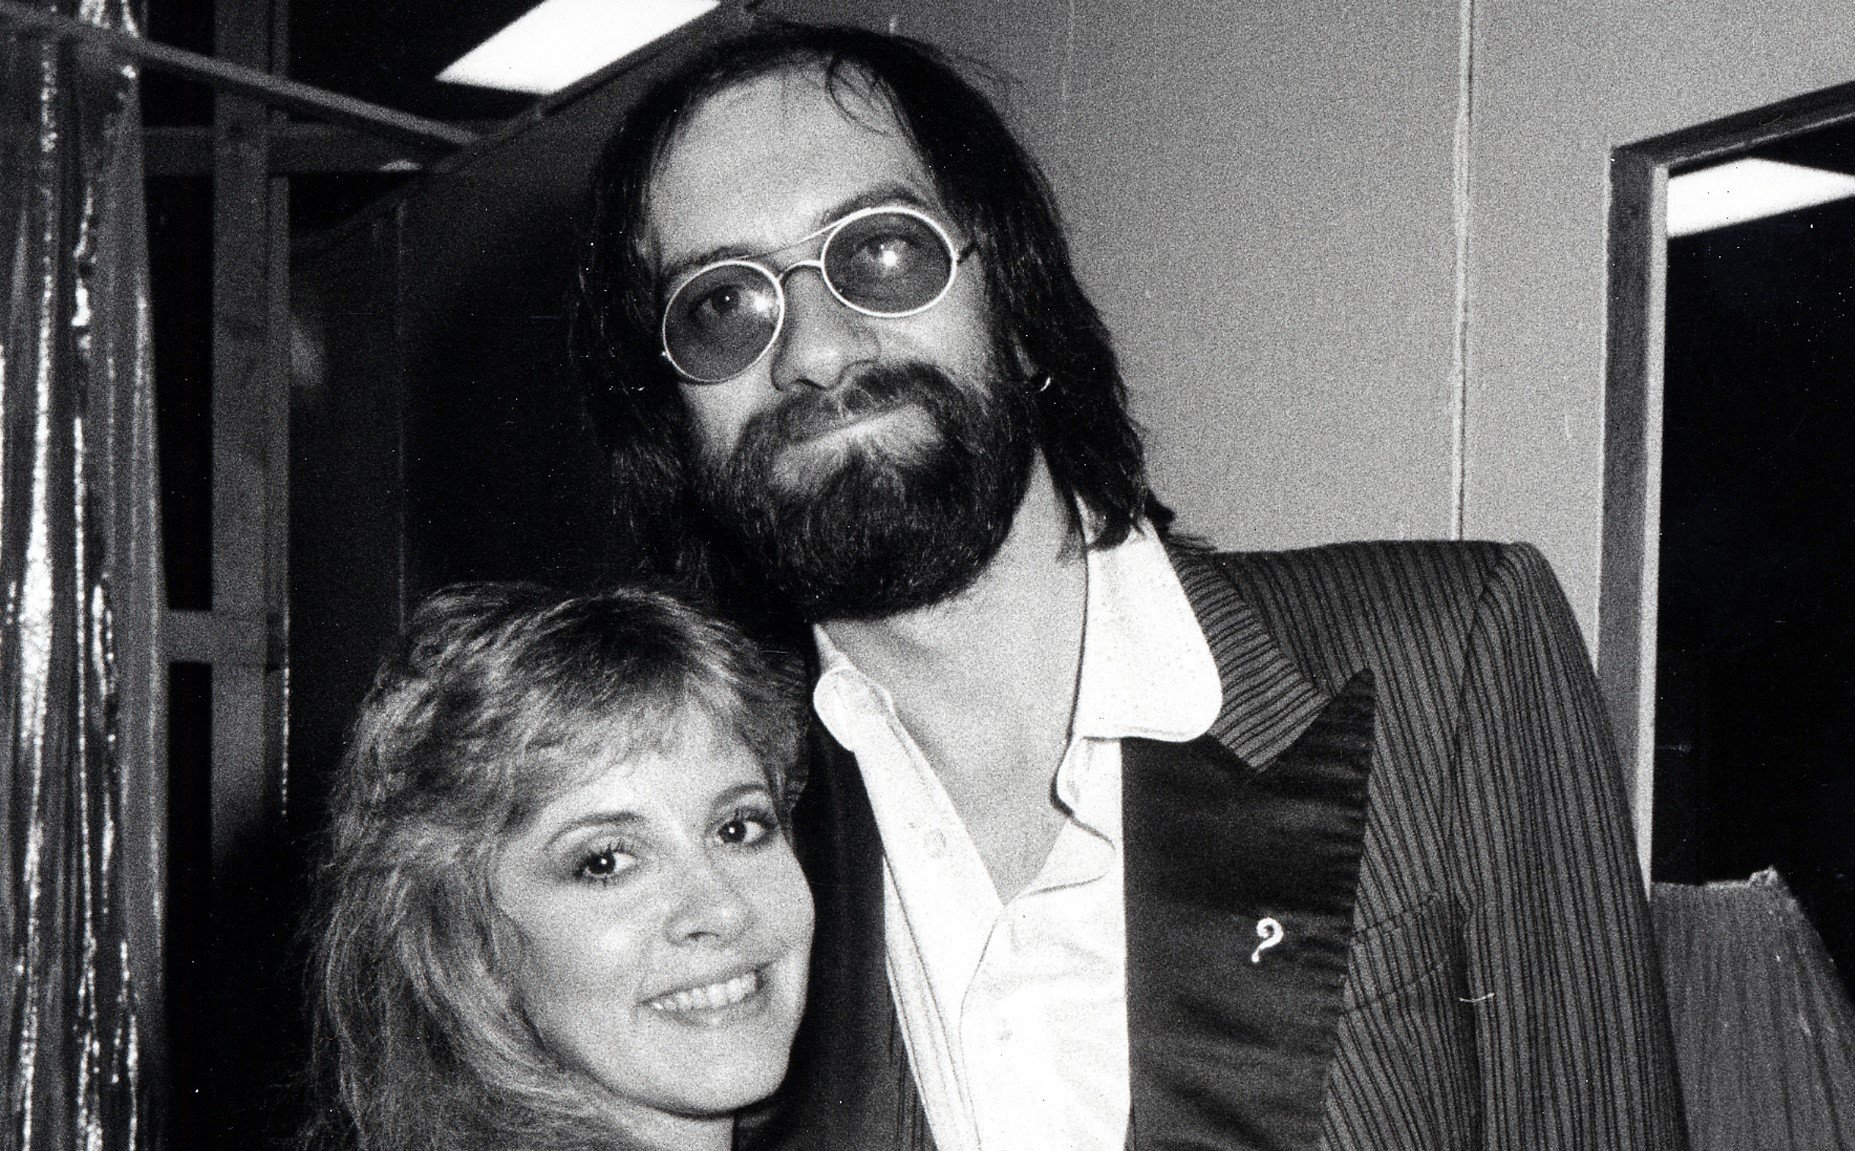 A black and white photo of Stevie Nicks and Mick Fleetwood smiling together. He wears sunglasses.